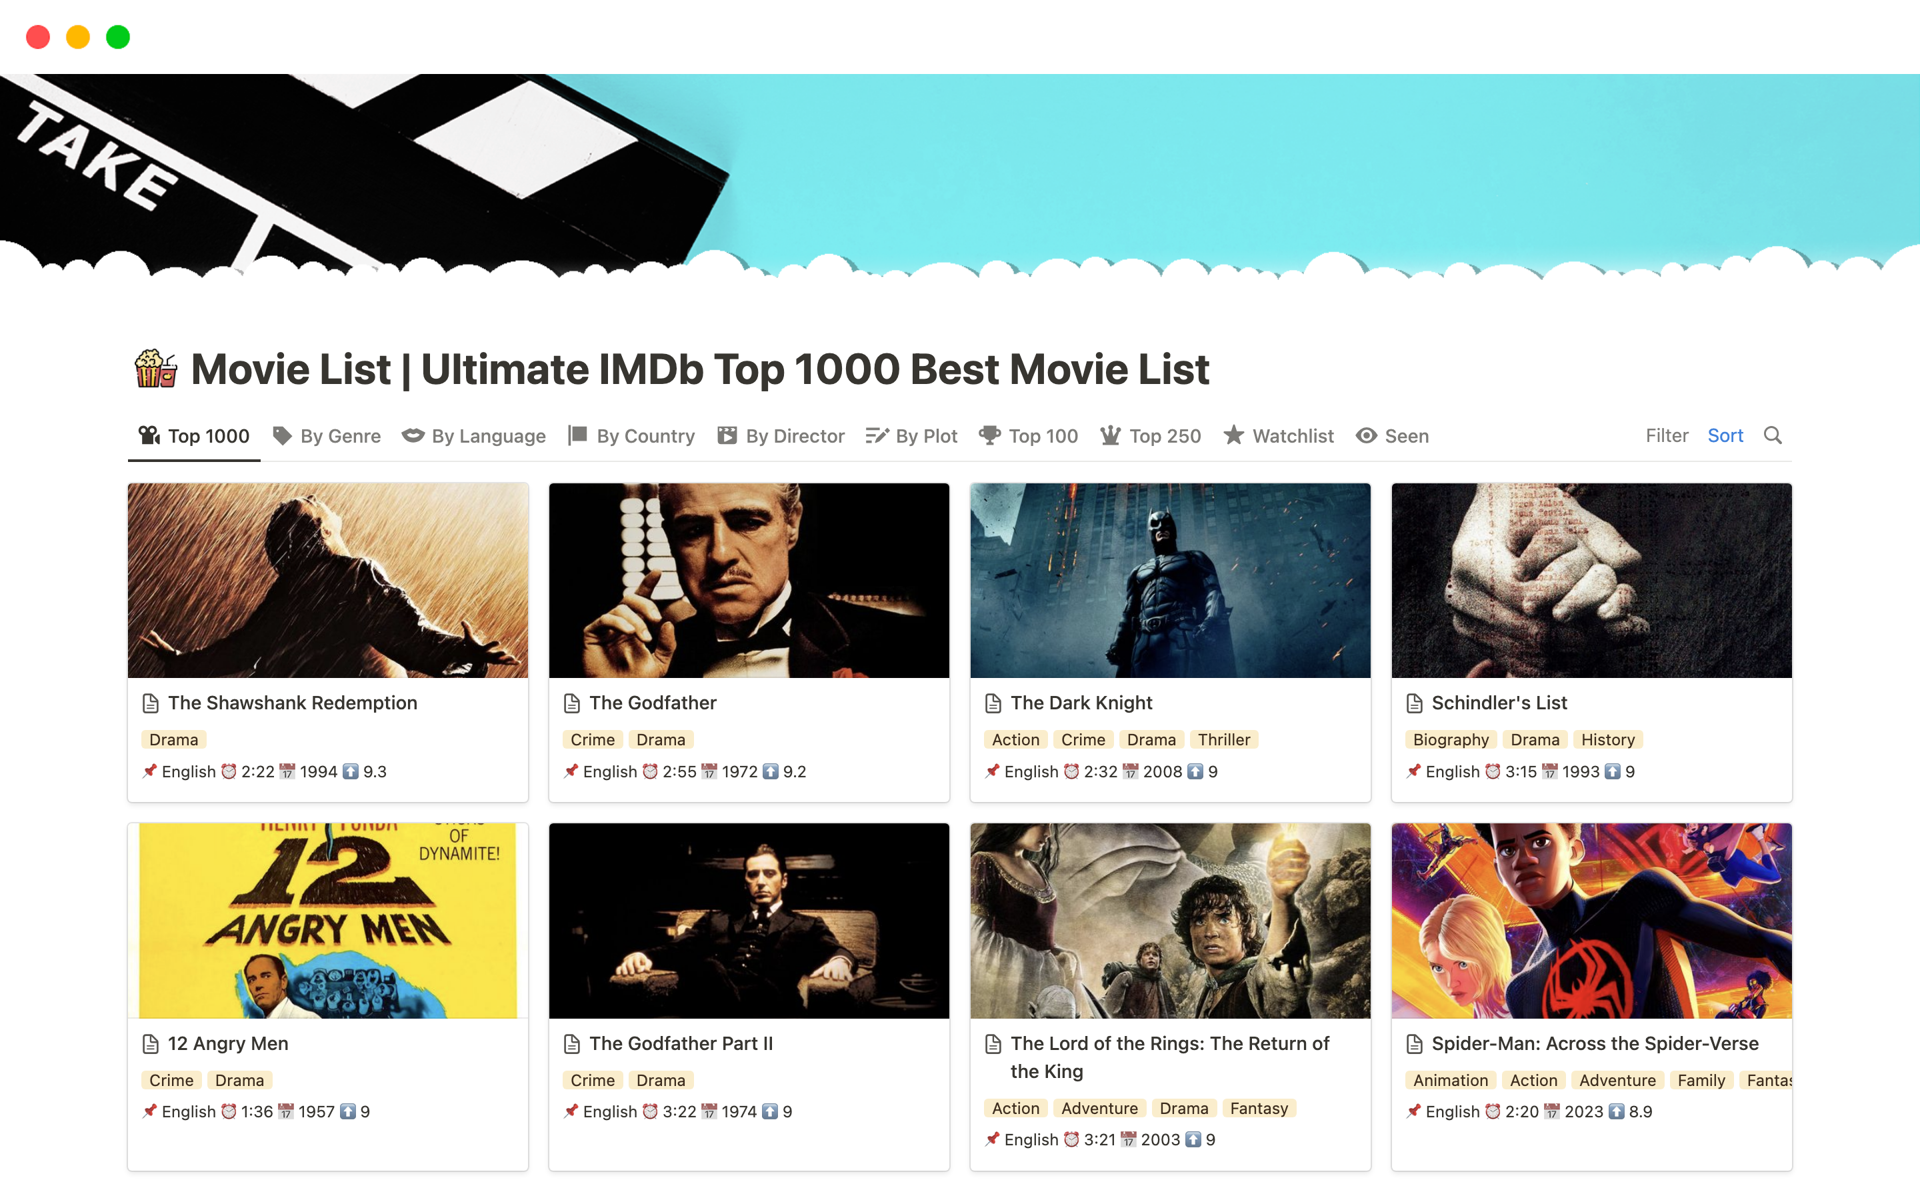 This template contains the best 1000 movies of all time based on the official IMDb chart, with all their data such as genres, year, language, country, runtime, rating, ranks, short plot and storyline, poster, etc., for your convenience of easy tracking and bookmarking.